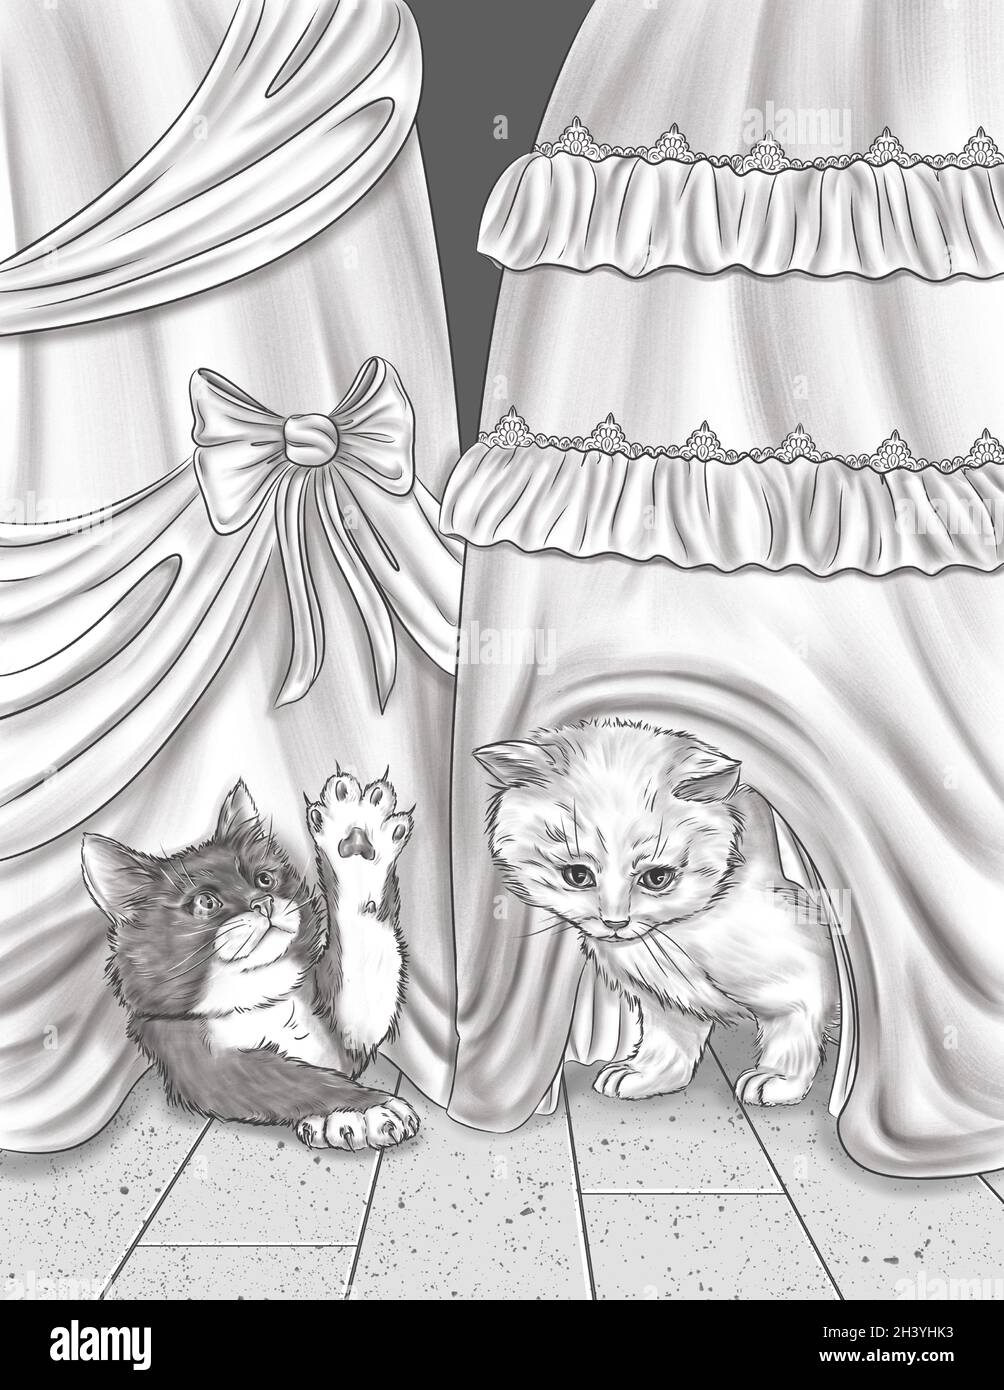 Two Small Cats Playing And Hiding Below Party Dress Colorless Line Drawing. Domesticated Feline Plays Under Gown Coloring Book P Stock Photo